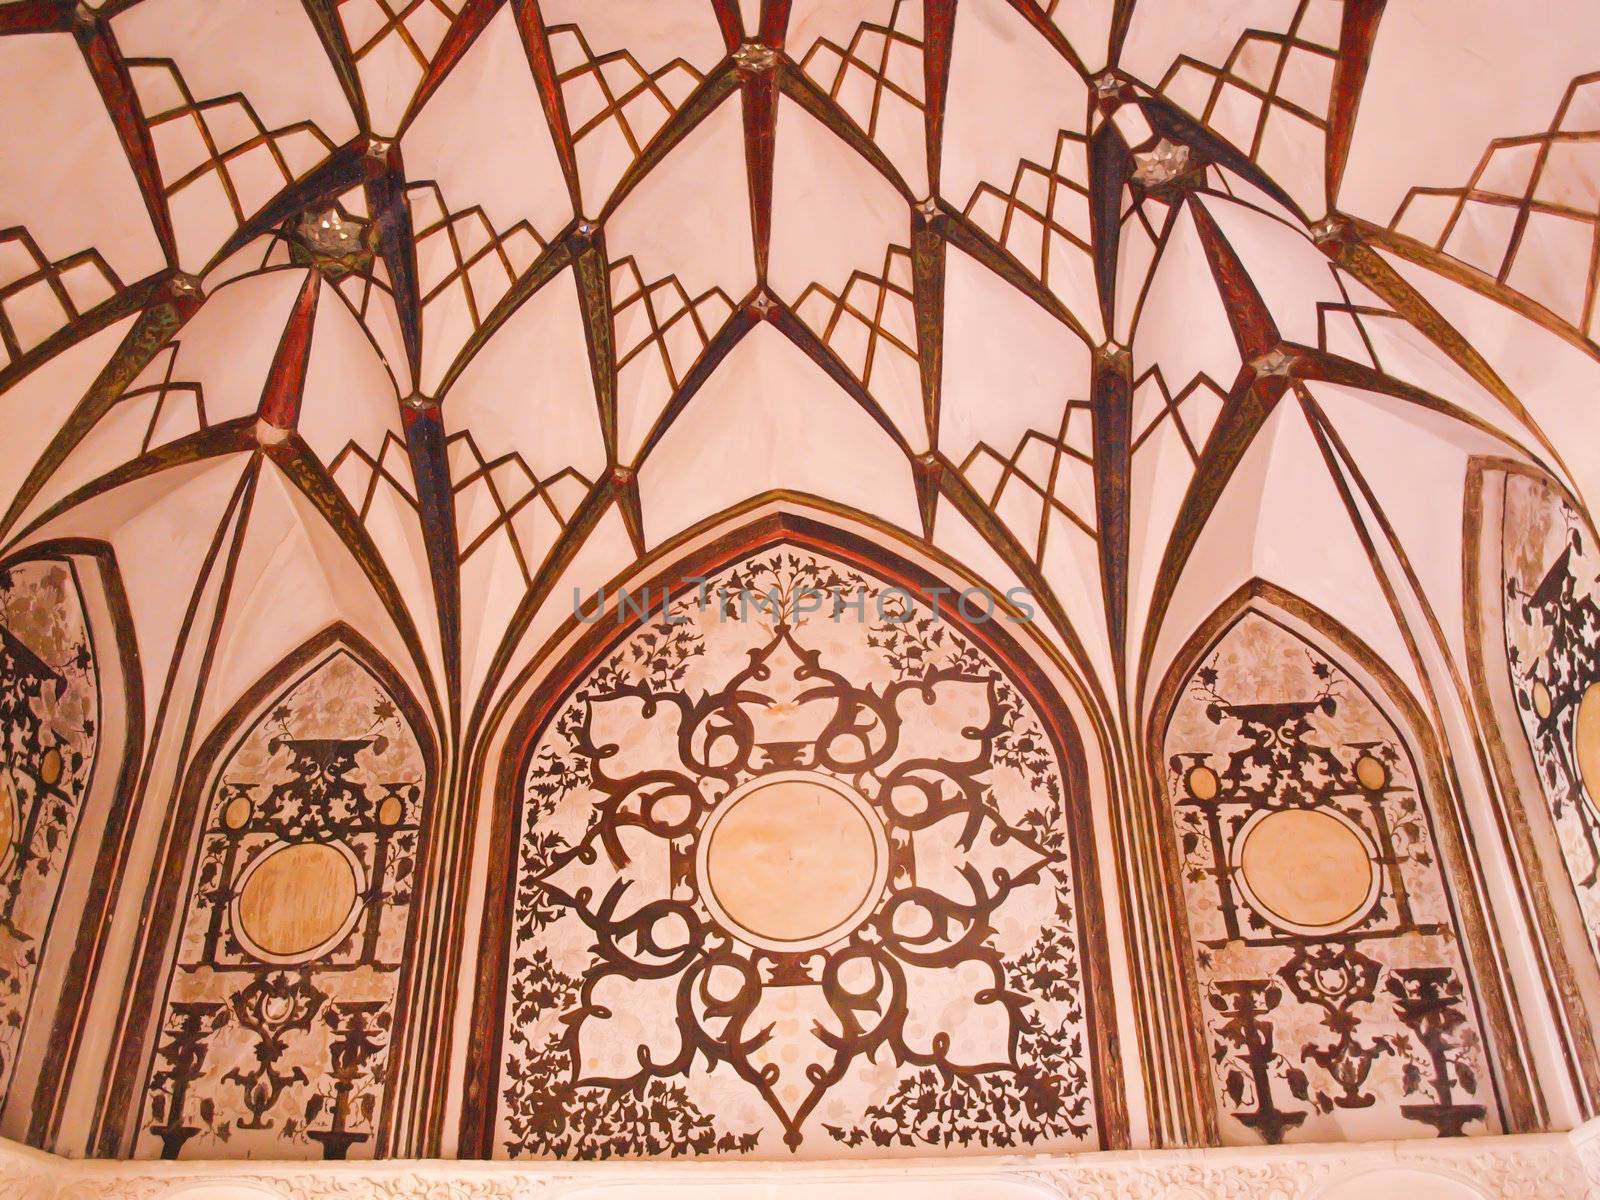 Ceiling decoration interior of historic old house in Kashan, Ira by gururugu